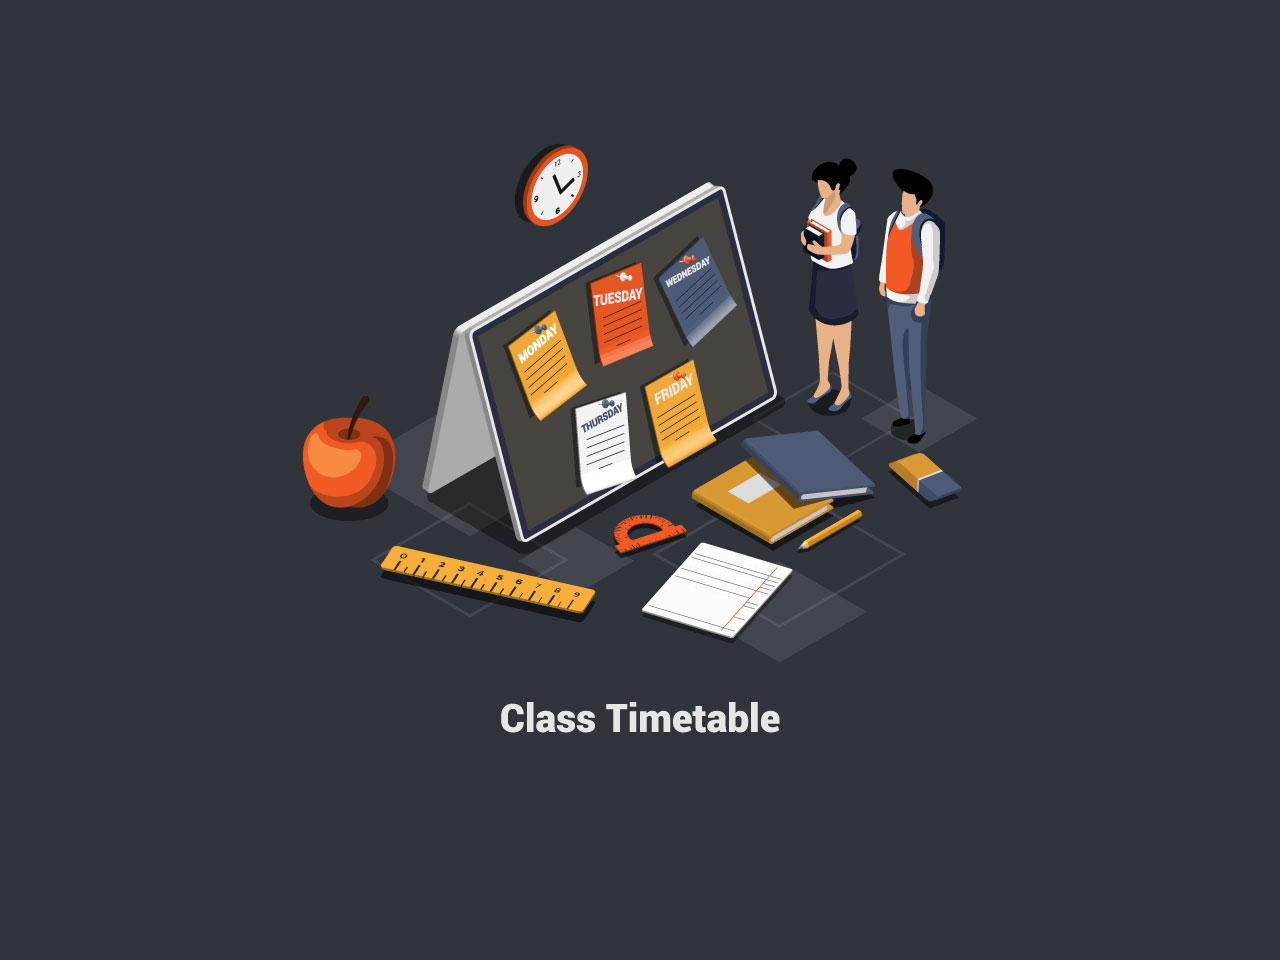 Online class clipart class timetable education digital calendar online learning male female characters near huge ruler sticker calendar with timetable studying isometric 3d illustration